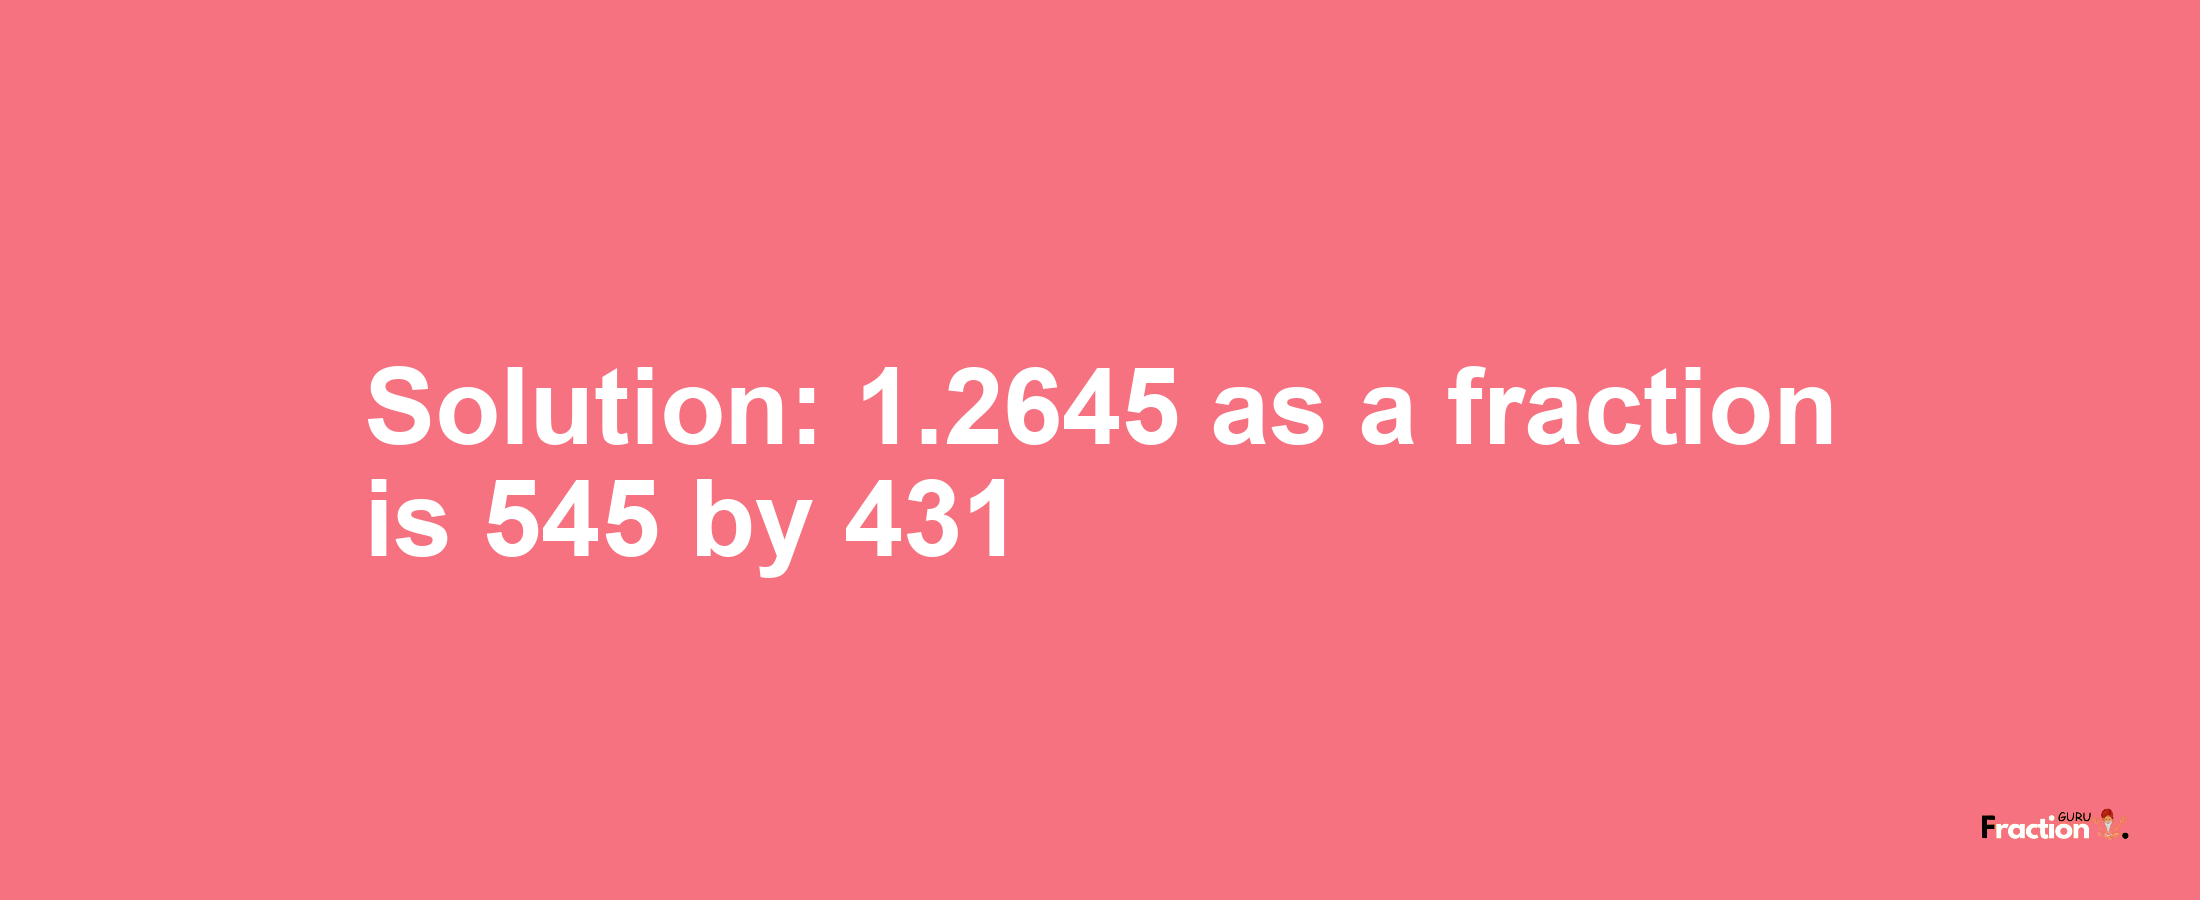 Solution:1.2645 as a fraction is 545/431